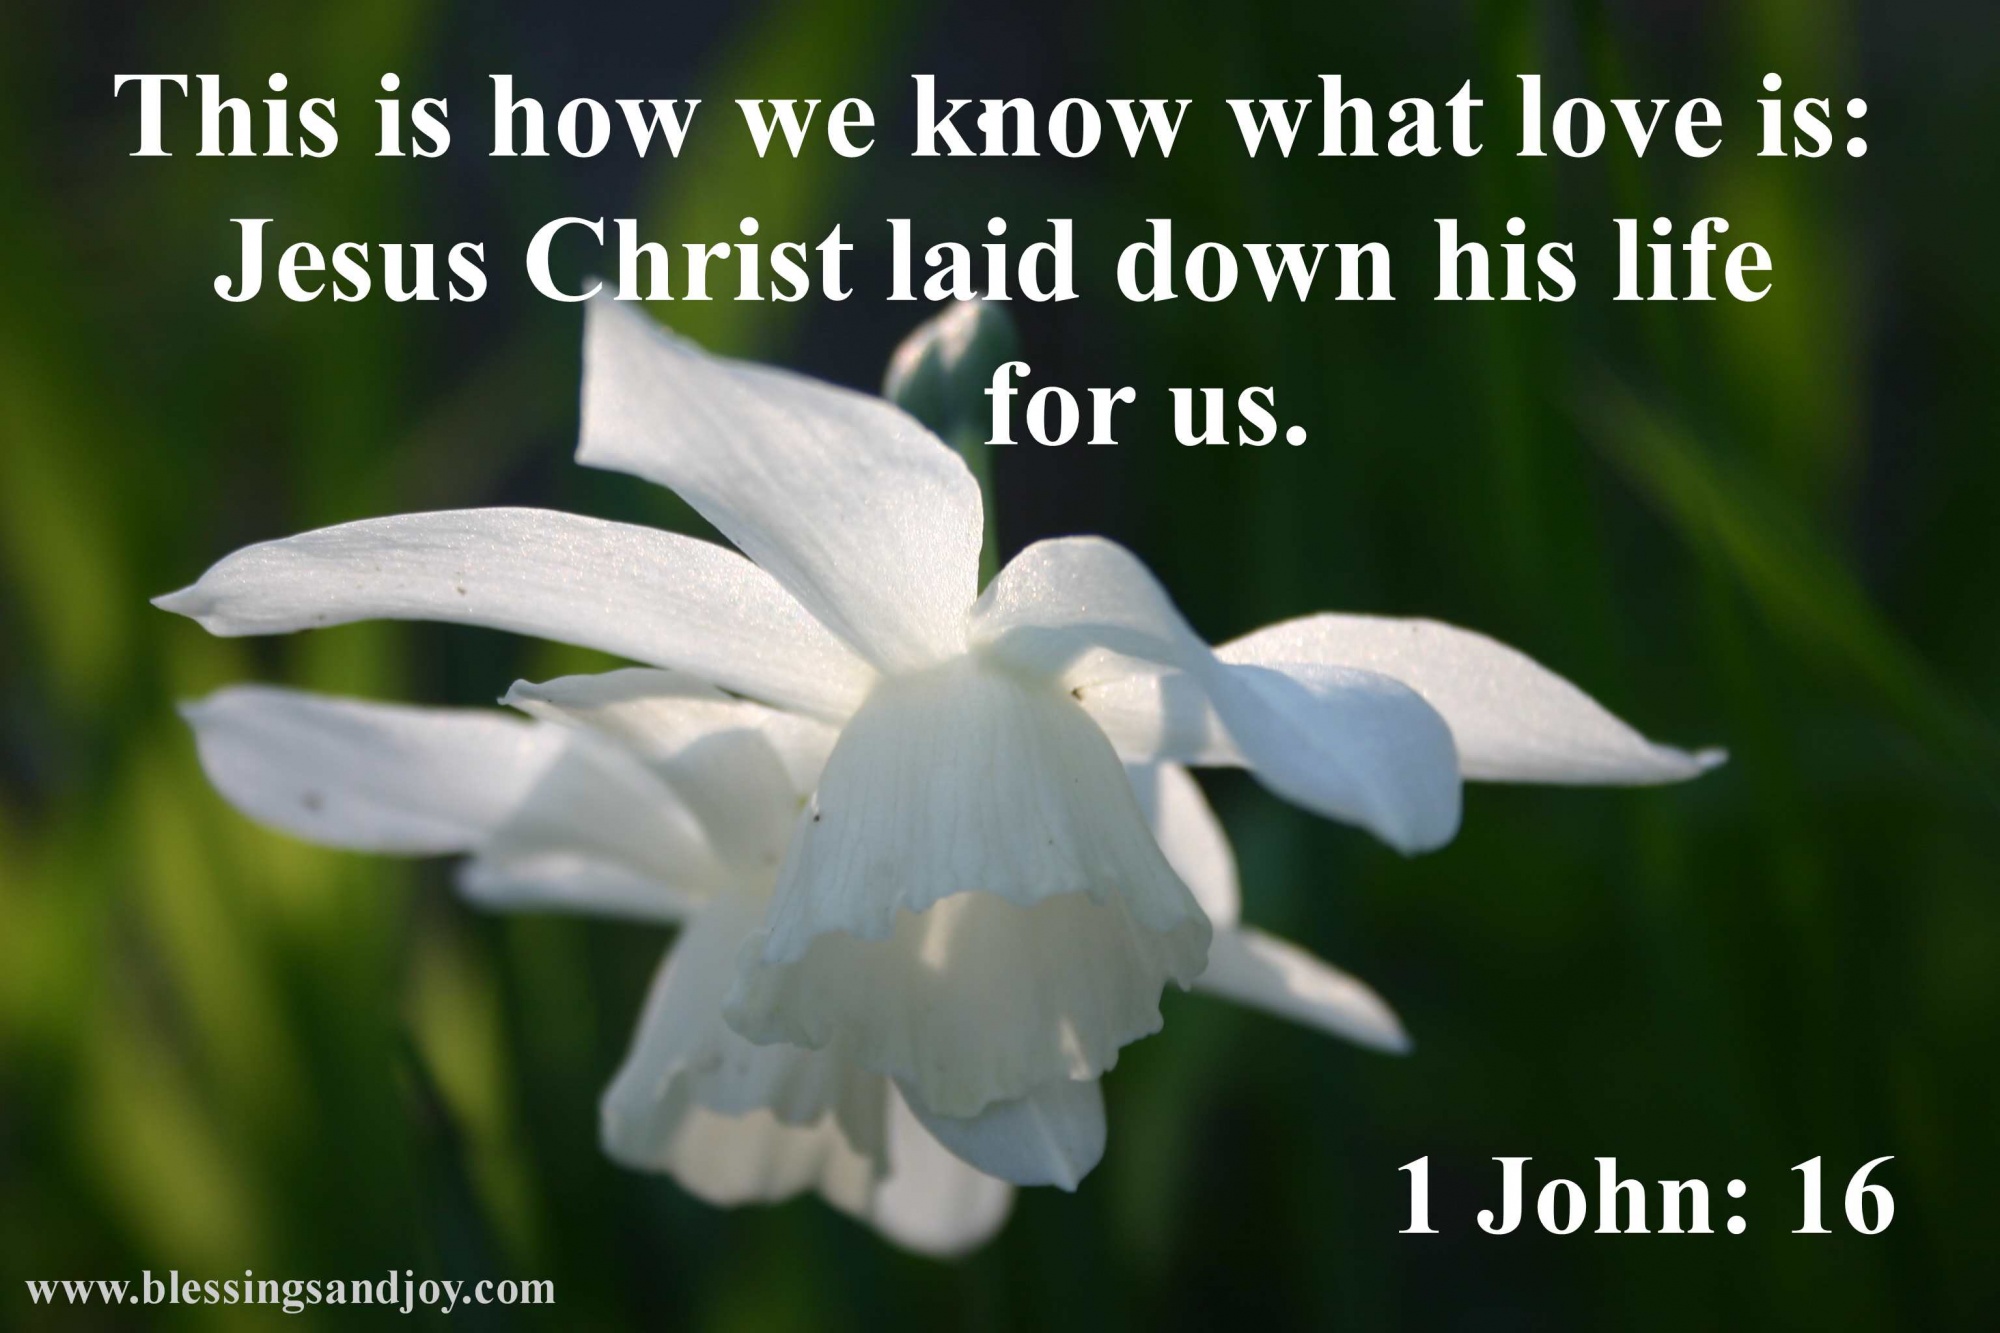 Easter_this_is_what_love_is-27